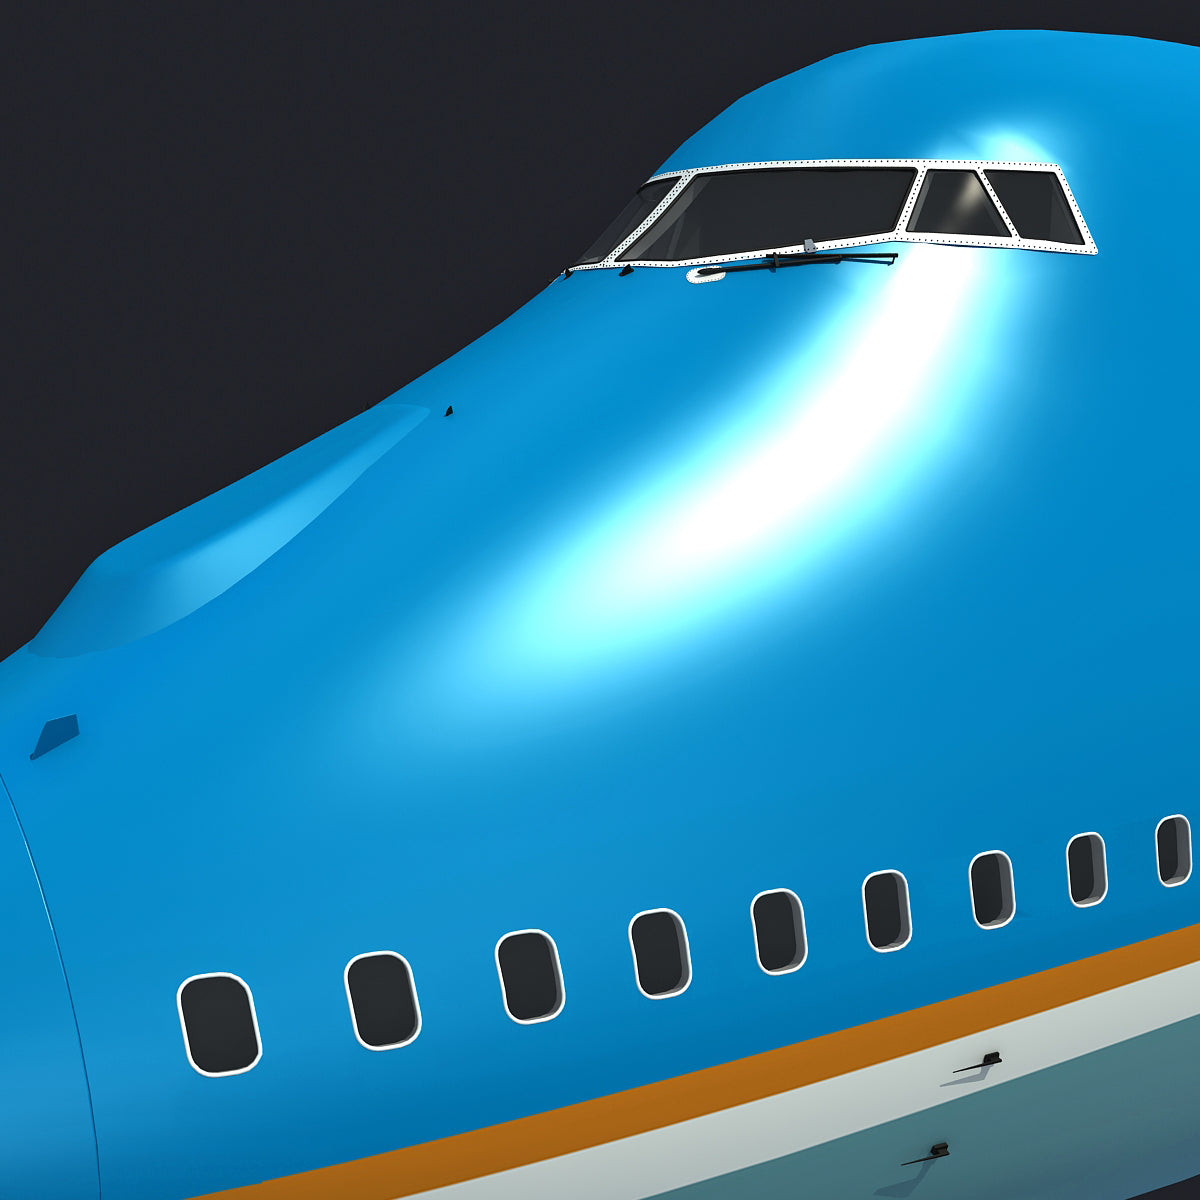 Air Force One 3D Model